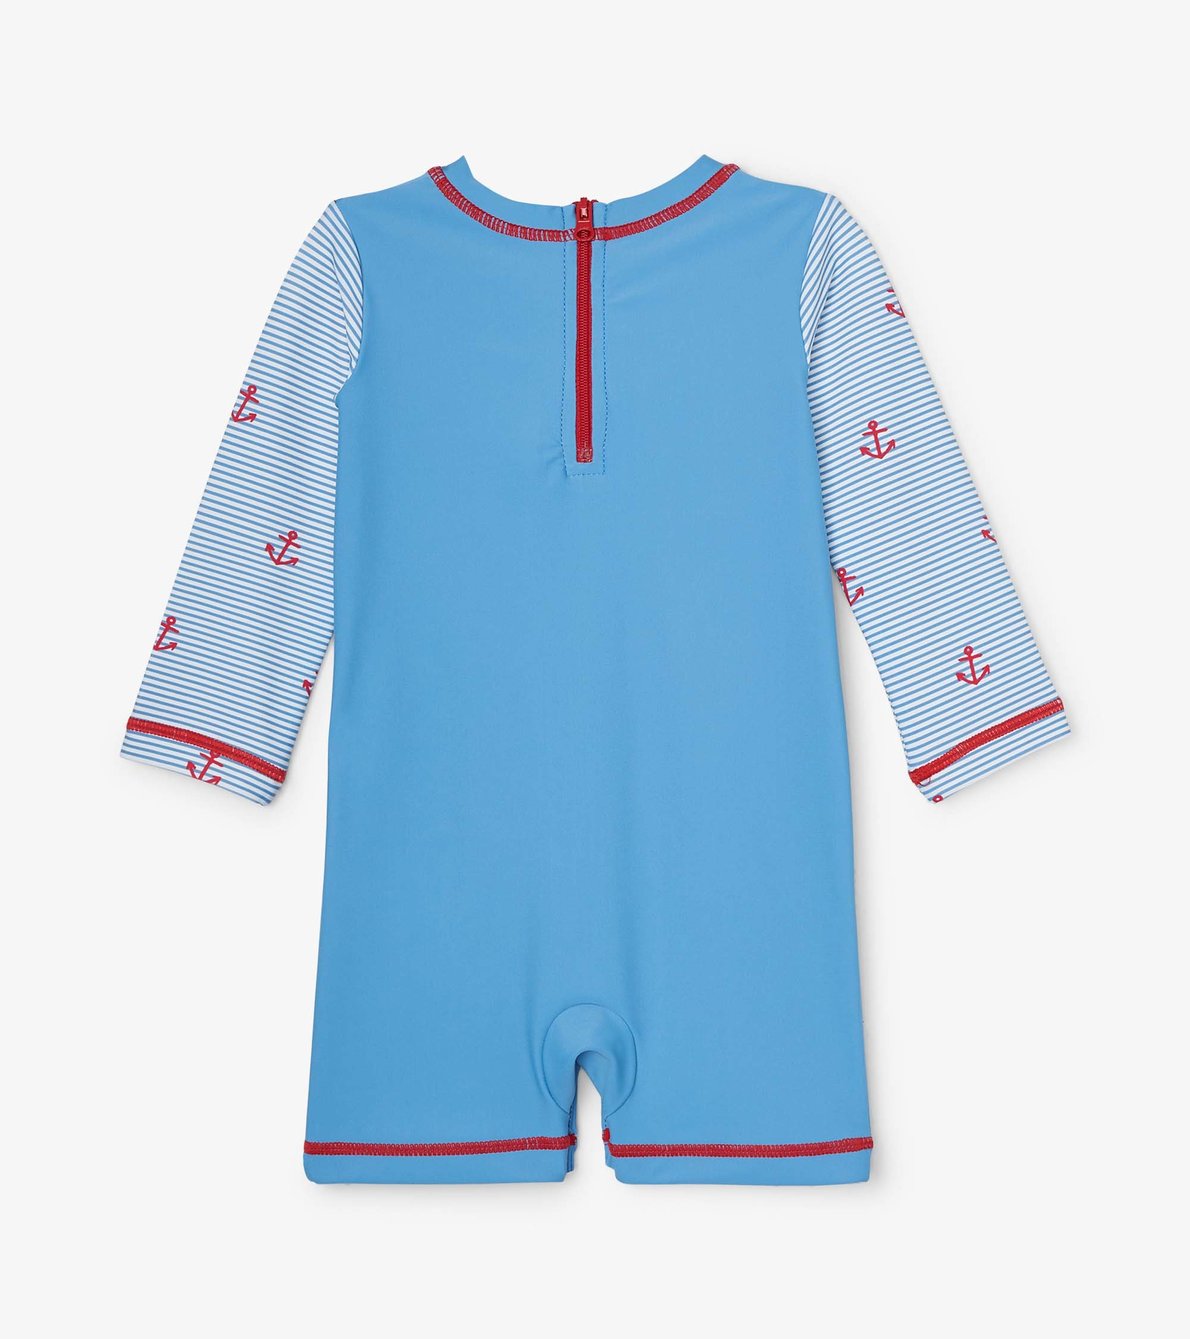 View larger image of Red Anchors Baby One-Piece Rashguard